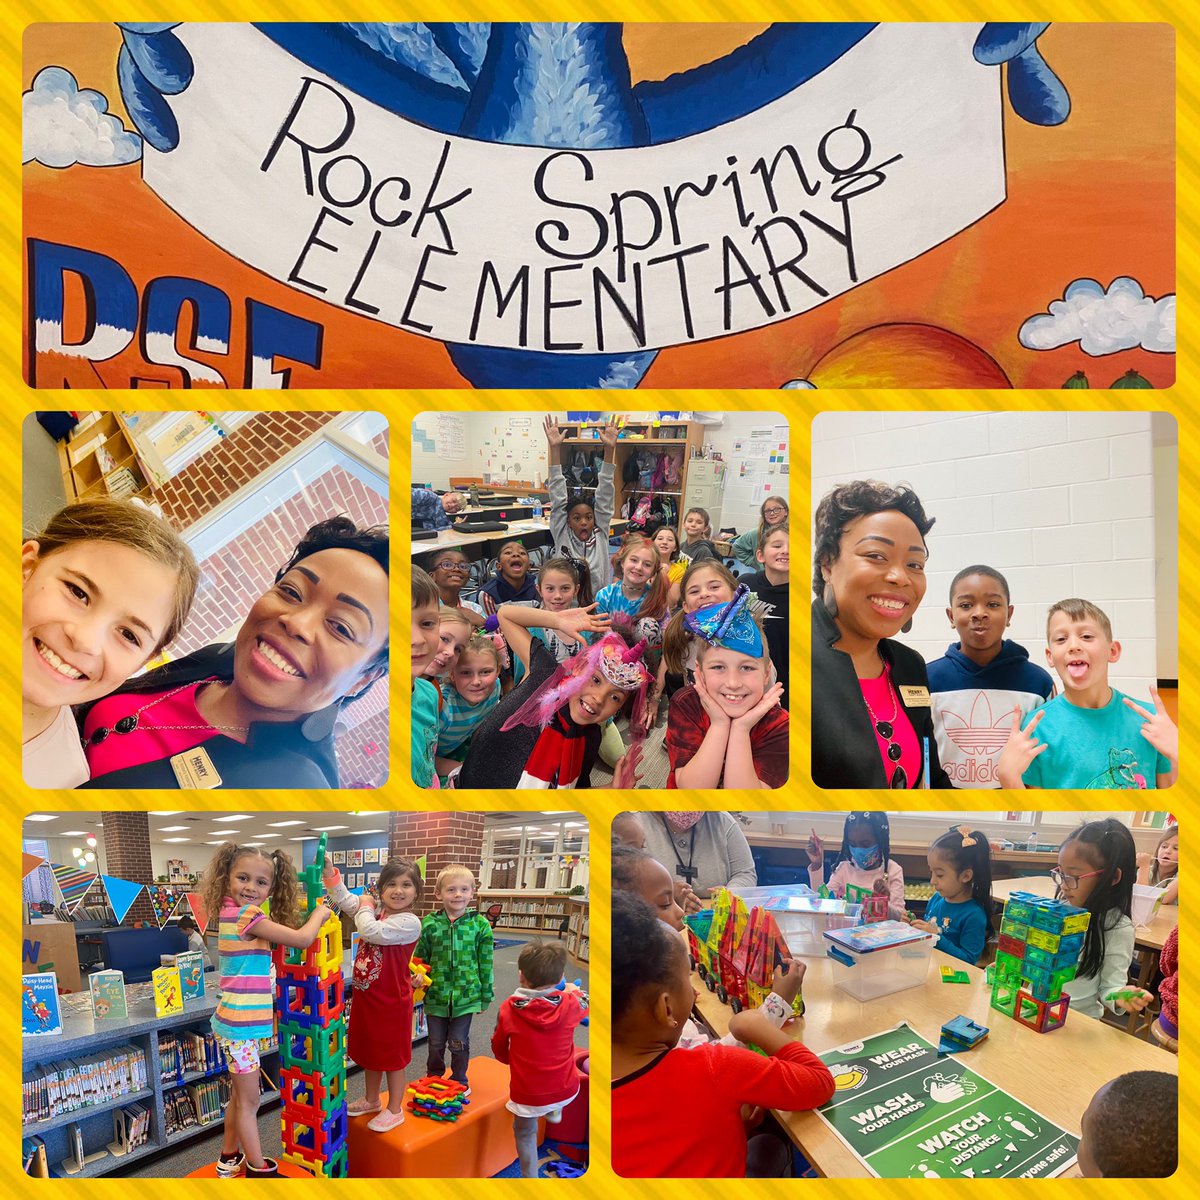 I loved spending time reading with my new 3rd grade buddies @RSE_HCS! They were such a joy, super inquisitive, and attentive! I also spent a little time with some kinders has they work on creativity & design building! @AlmandBonnie @ketruitt #ReadAcrossHenry2022 #HenryReads